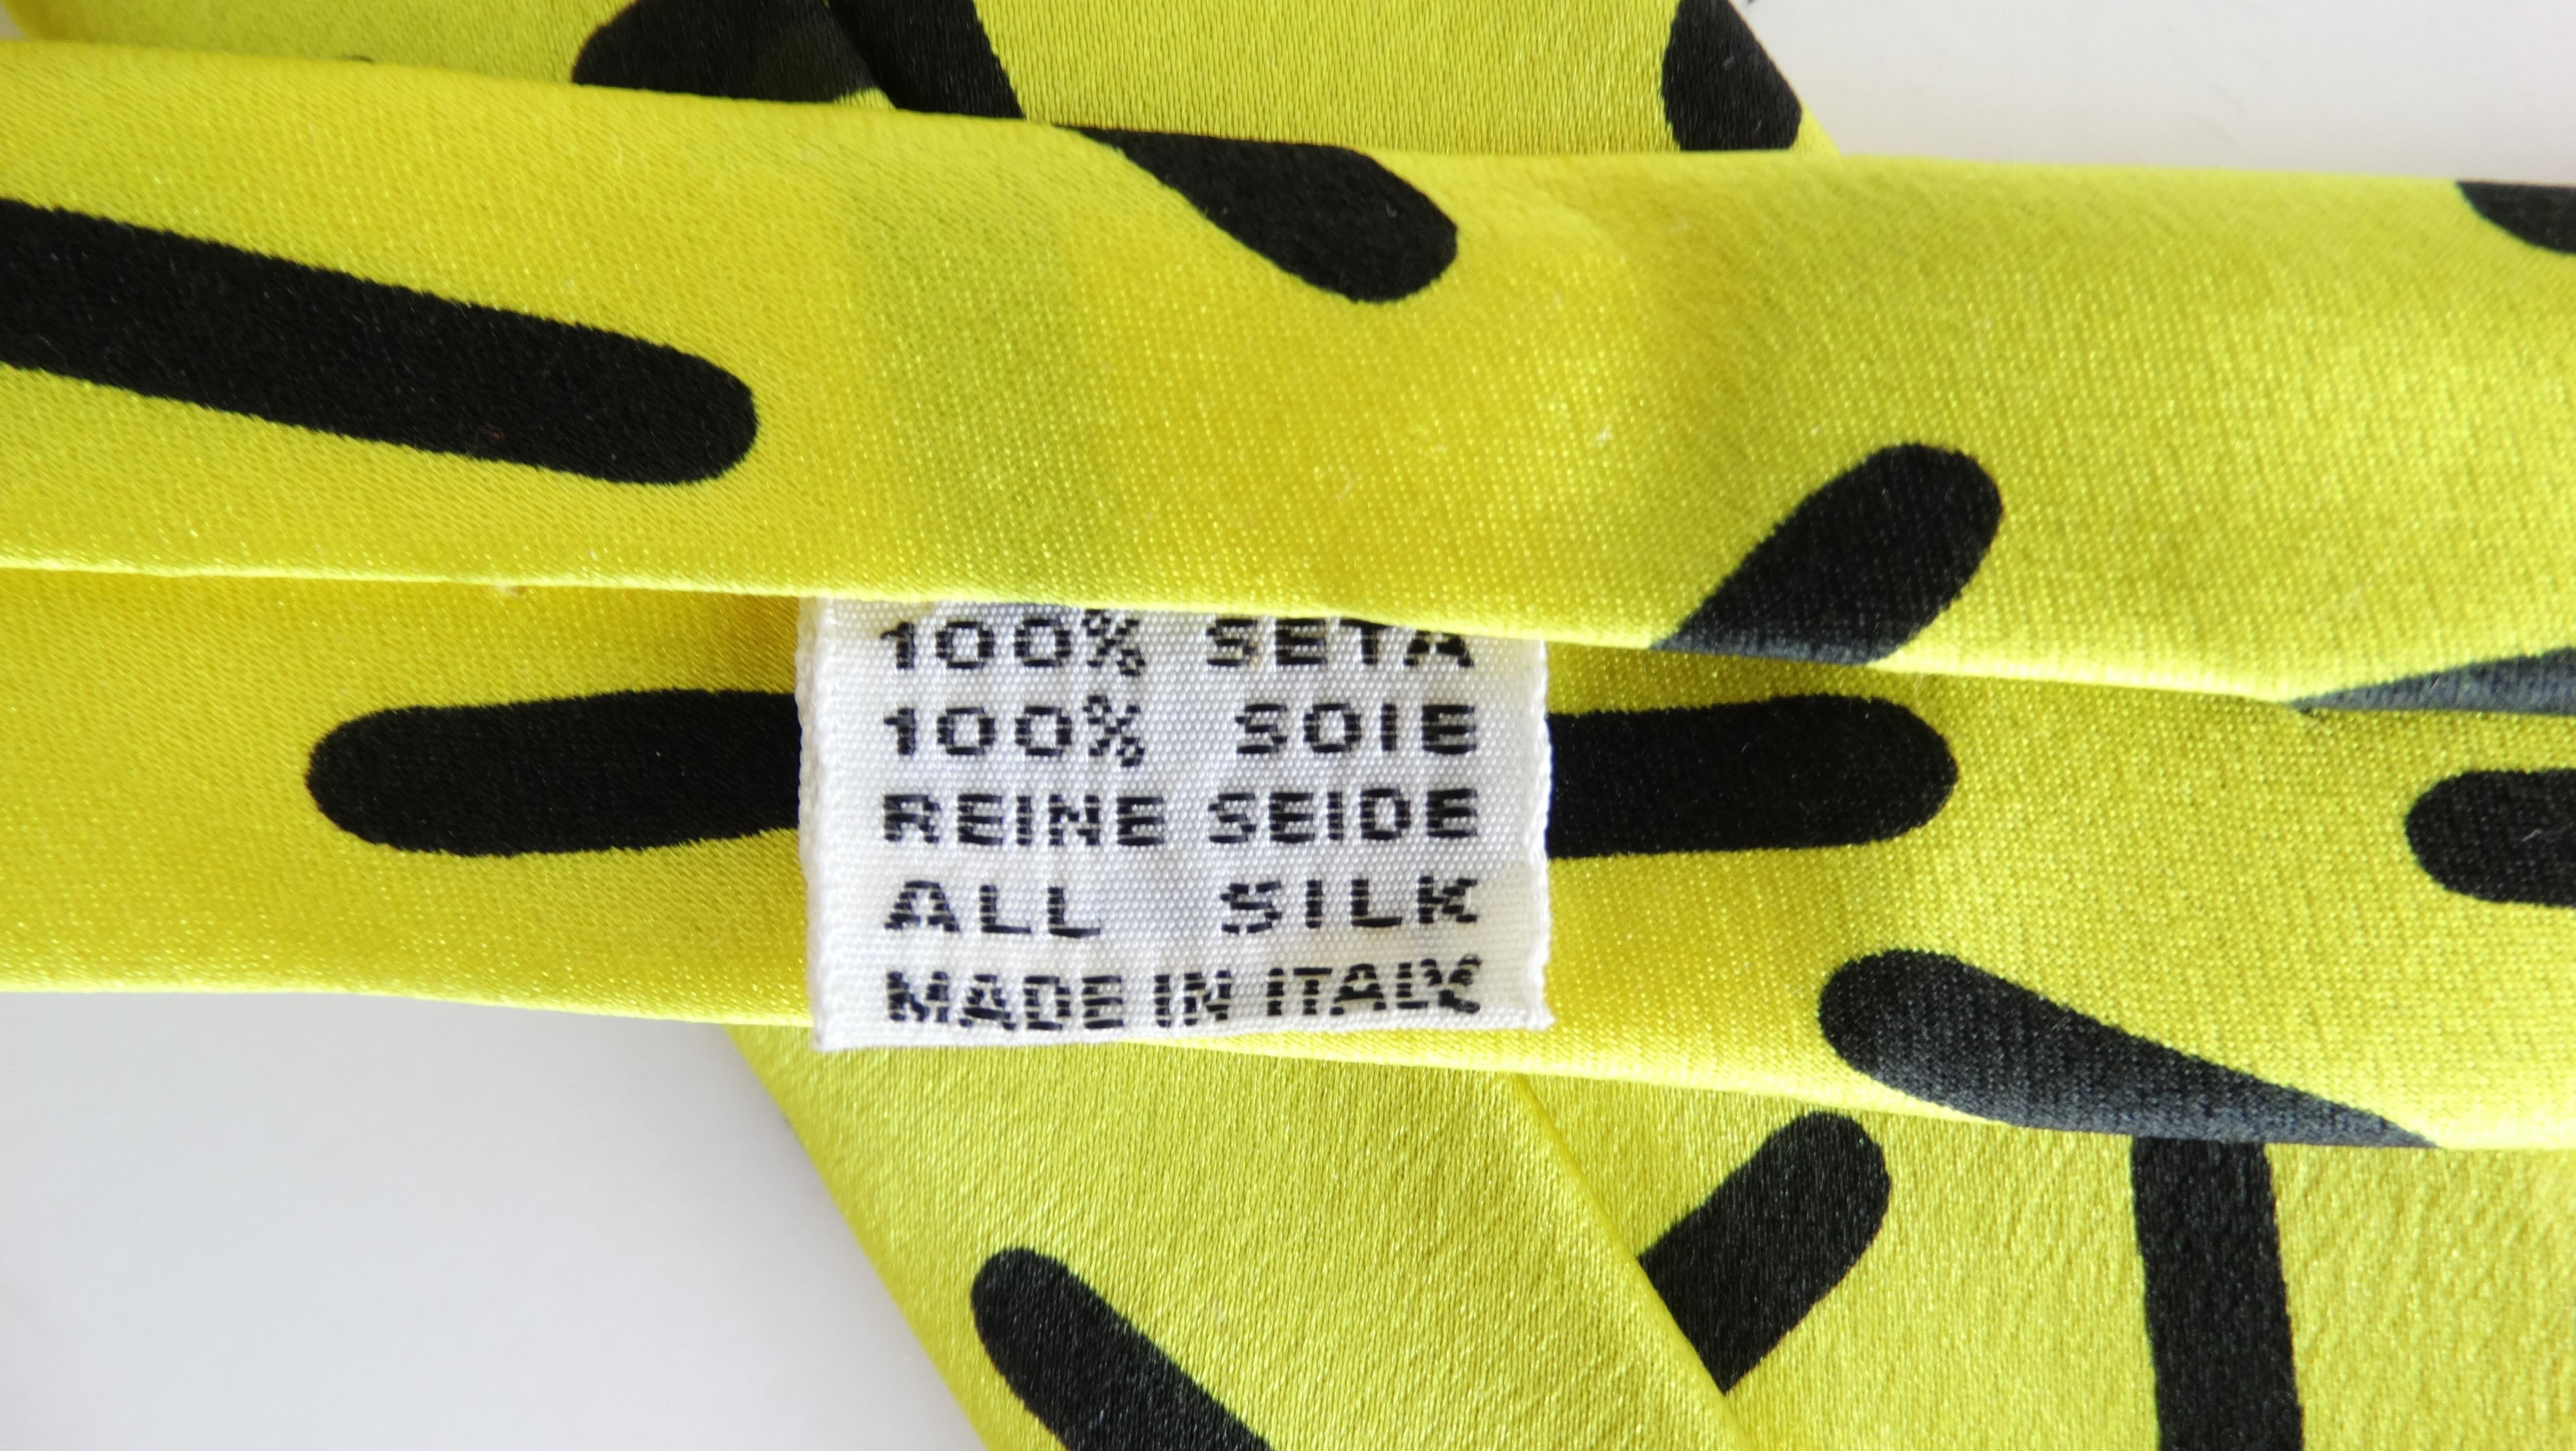 Elevate your look with this amazing Memphis Milano tie! Circa 1983, this Silk tie features a geometric design created by Memphis Milano member and creator, Ettore Sottsass. Comprised of black bullet shapes against a bright yellow background, this